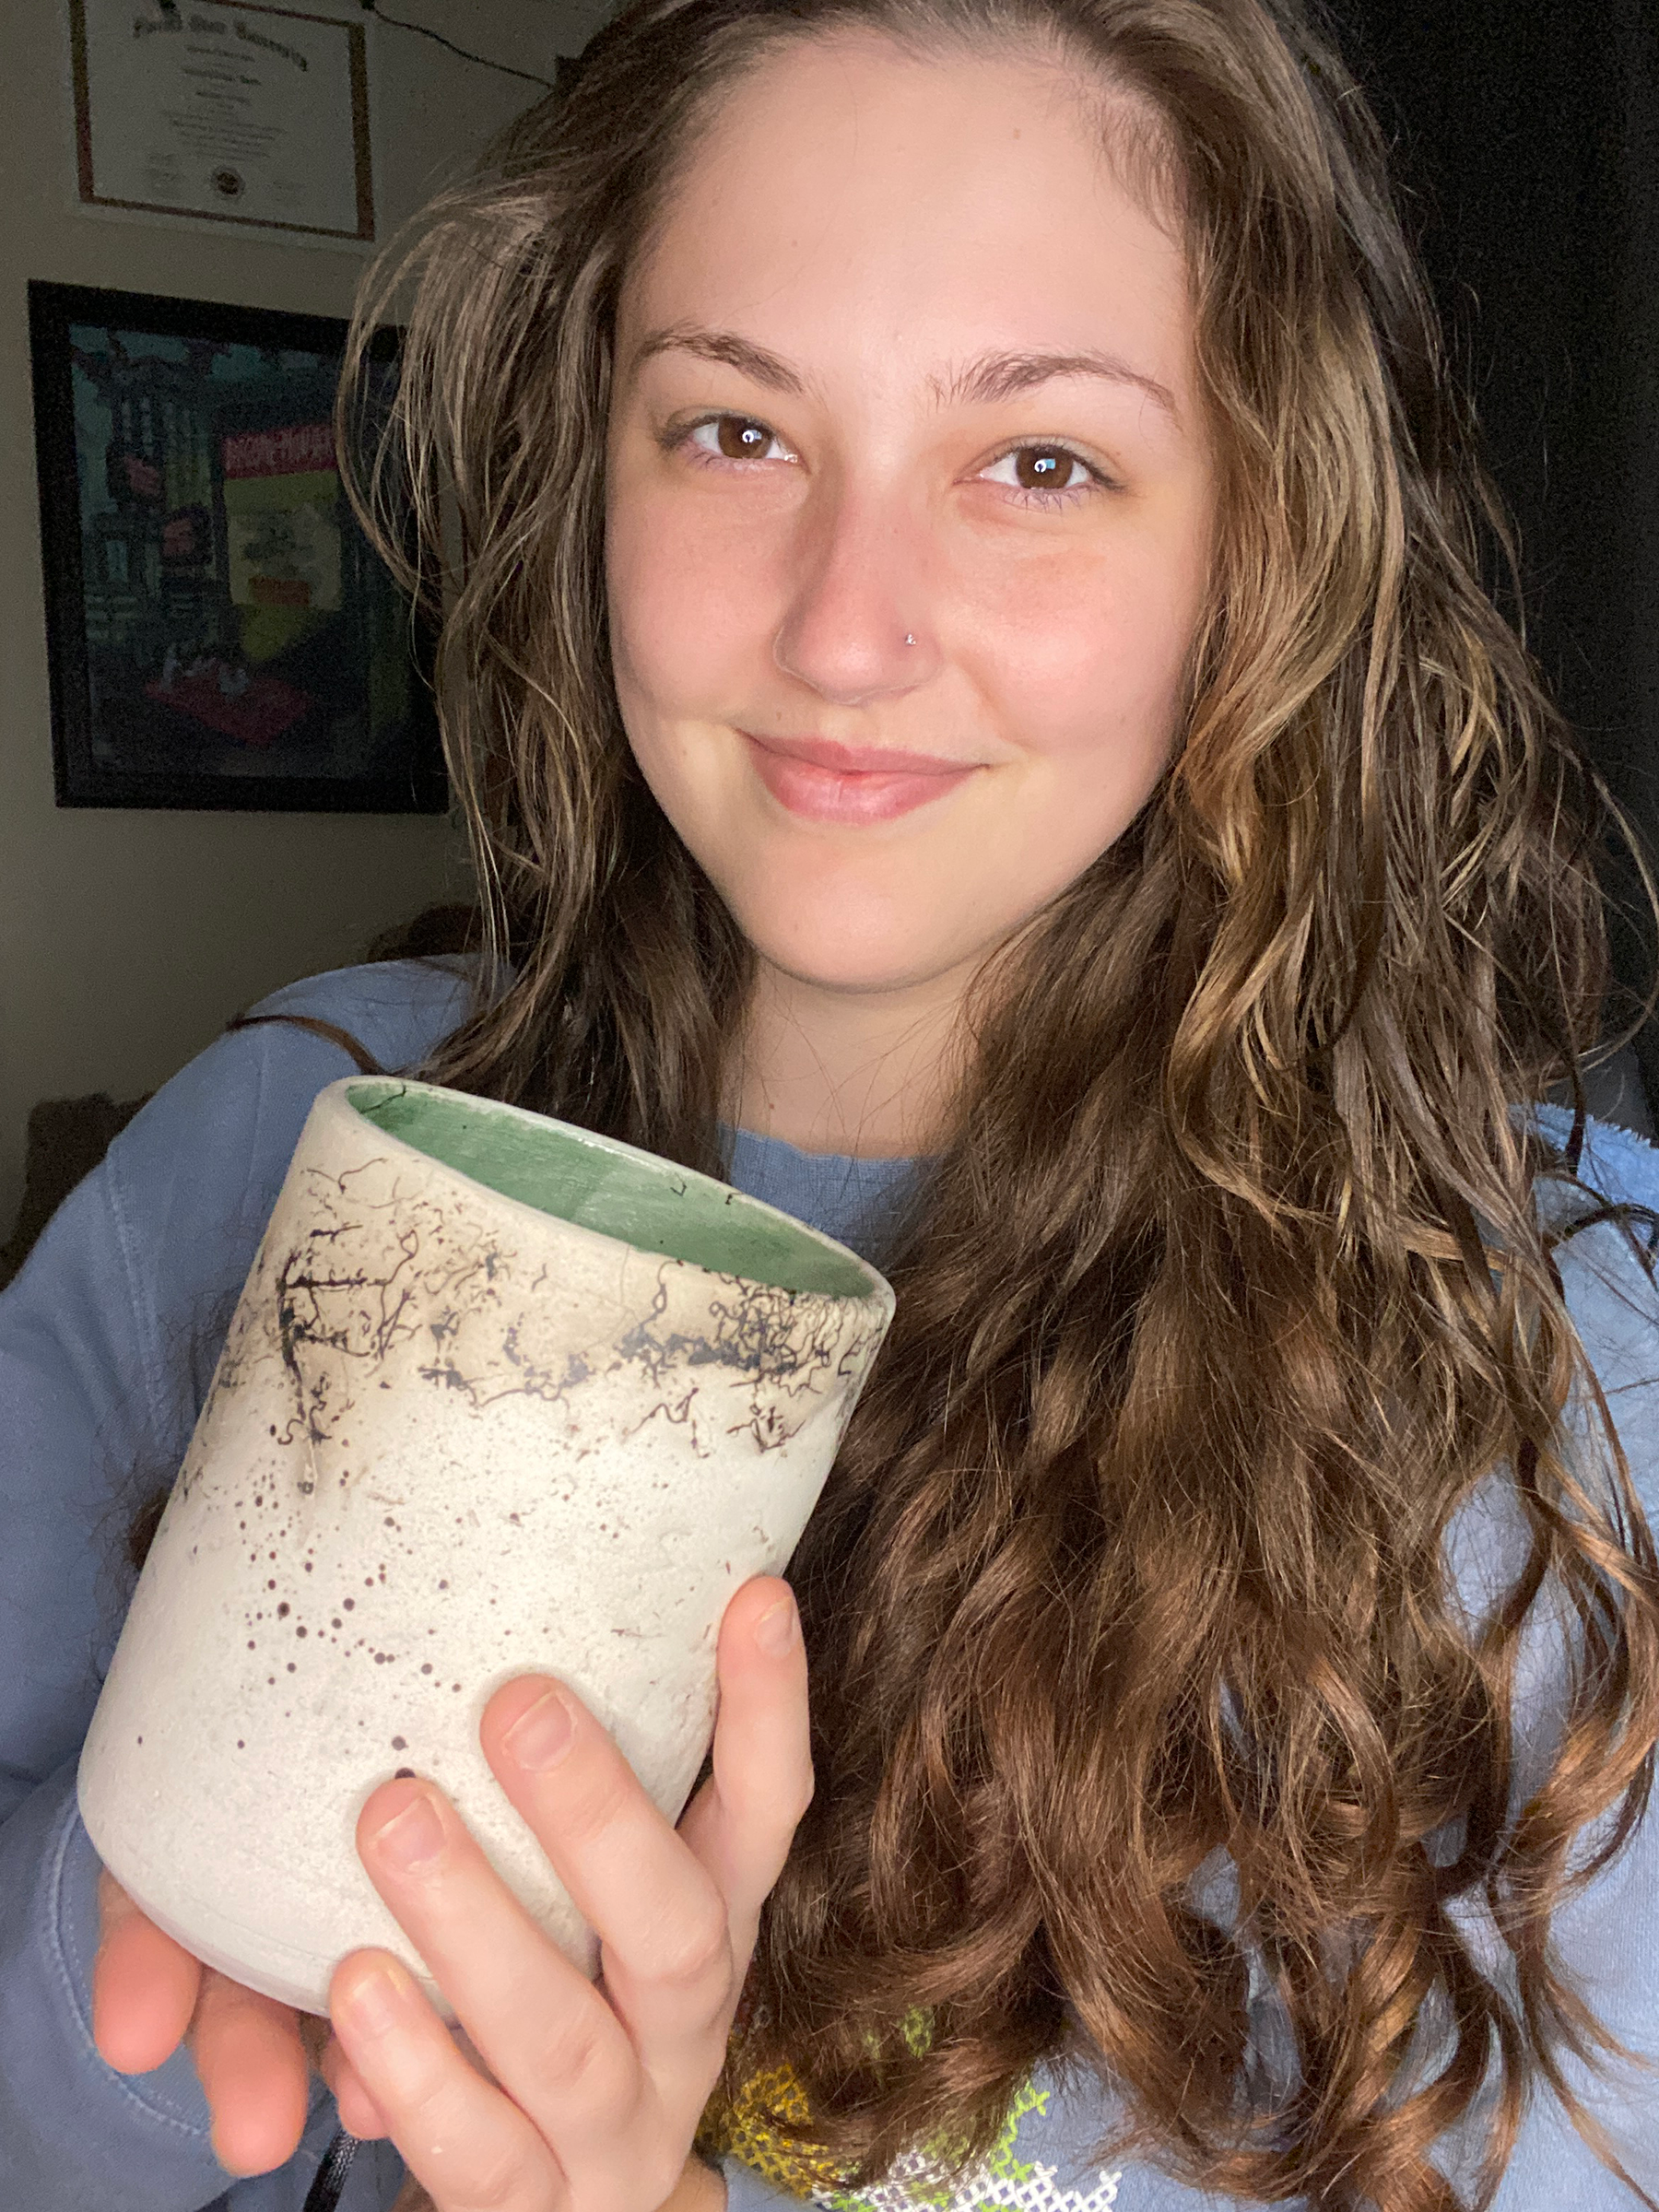 Emily is a young woman with long curly brown hair and brown eyes. She is wearing a blue sweatshirt and holding a cylindrical pot with black smokey dots and squiggly lines indicative of Raku firing.  